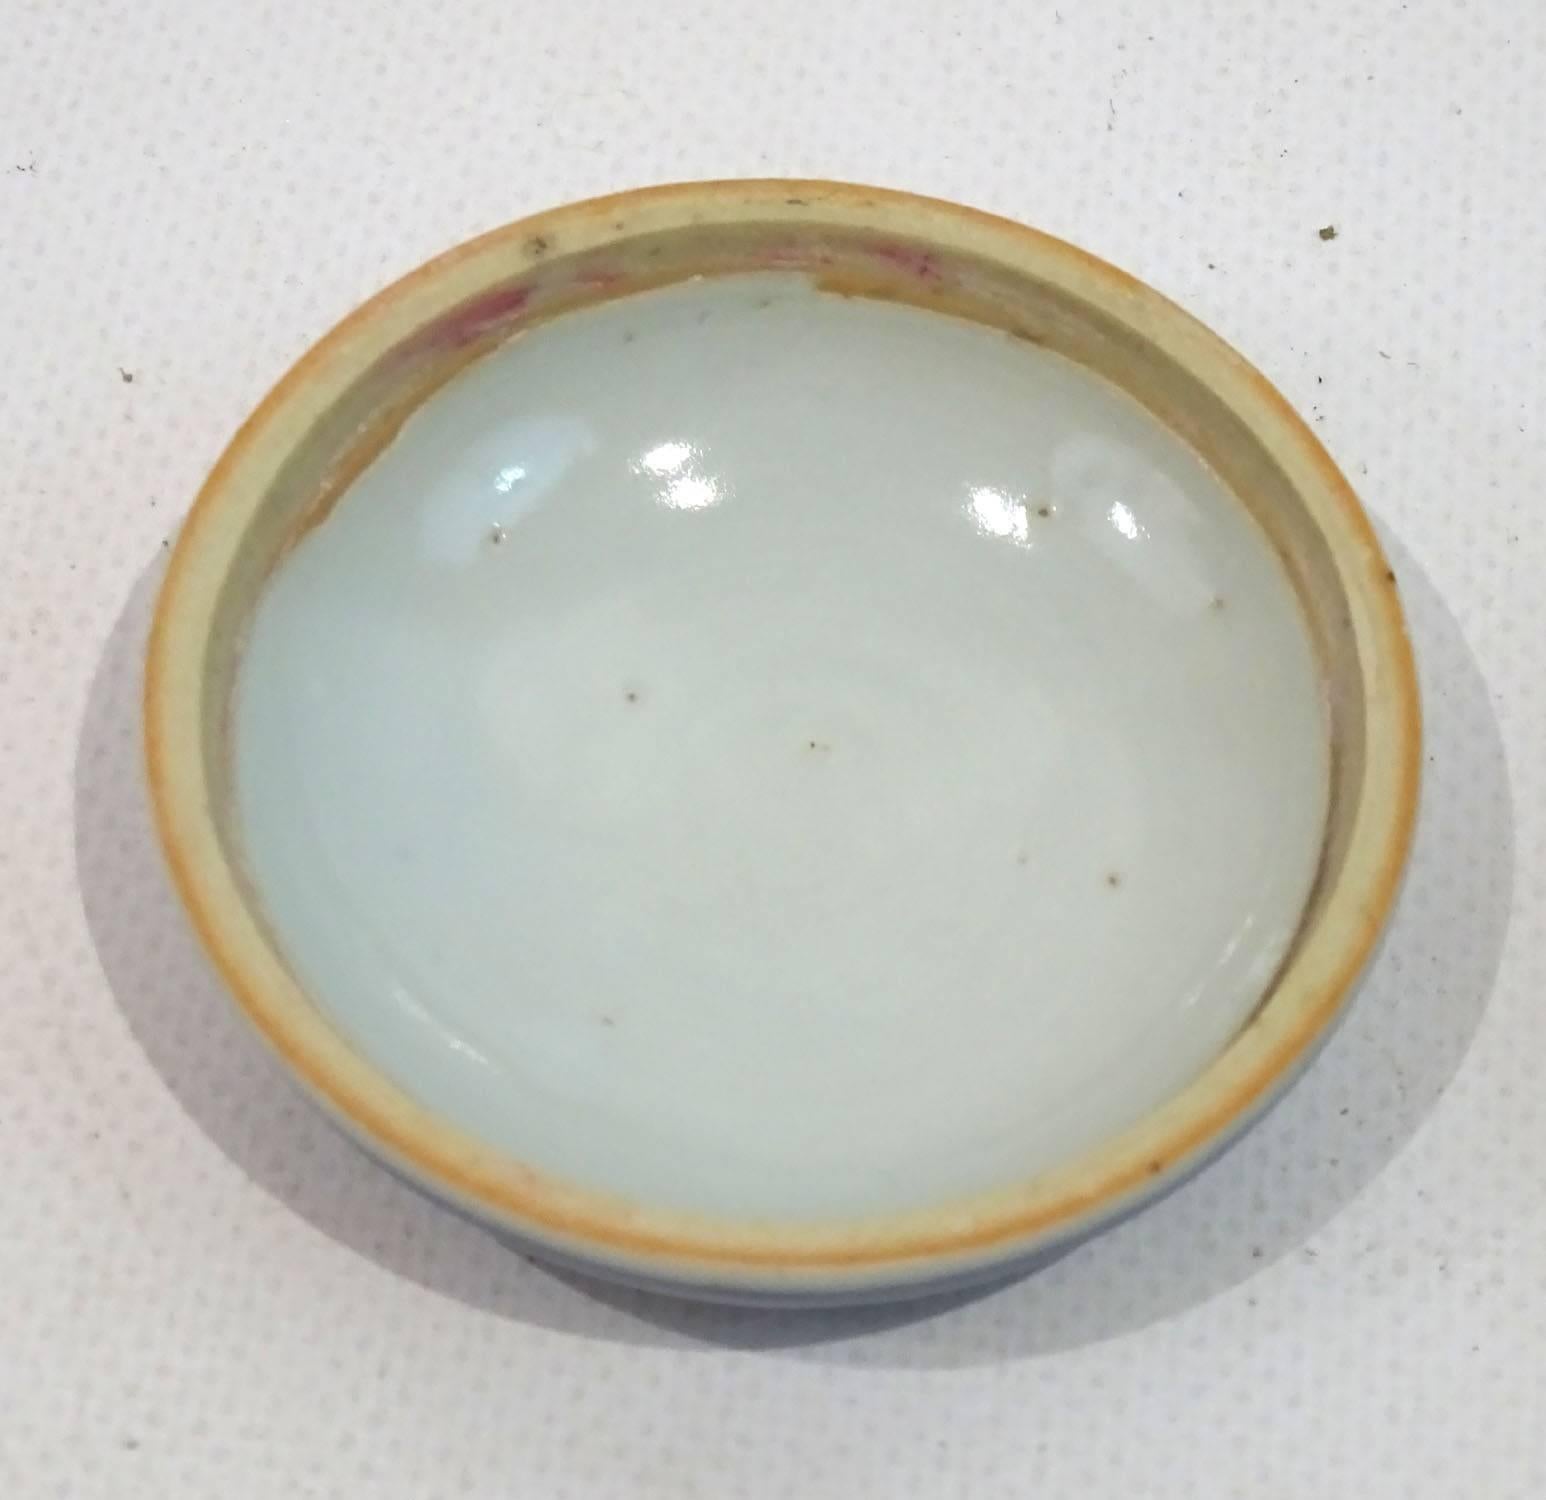 18th Century and Earlier 17th Century Chinese Porcelain Box with Lid from The Hatcher Collection